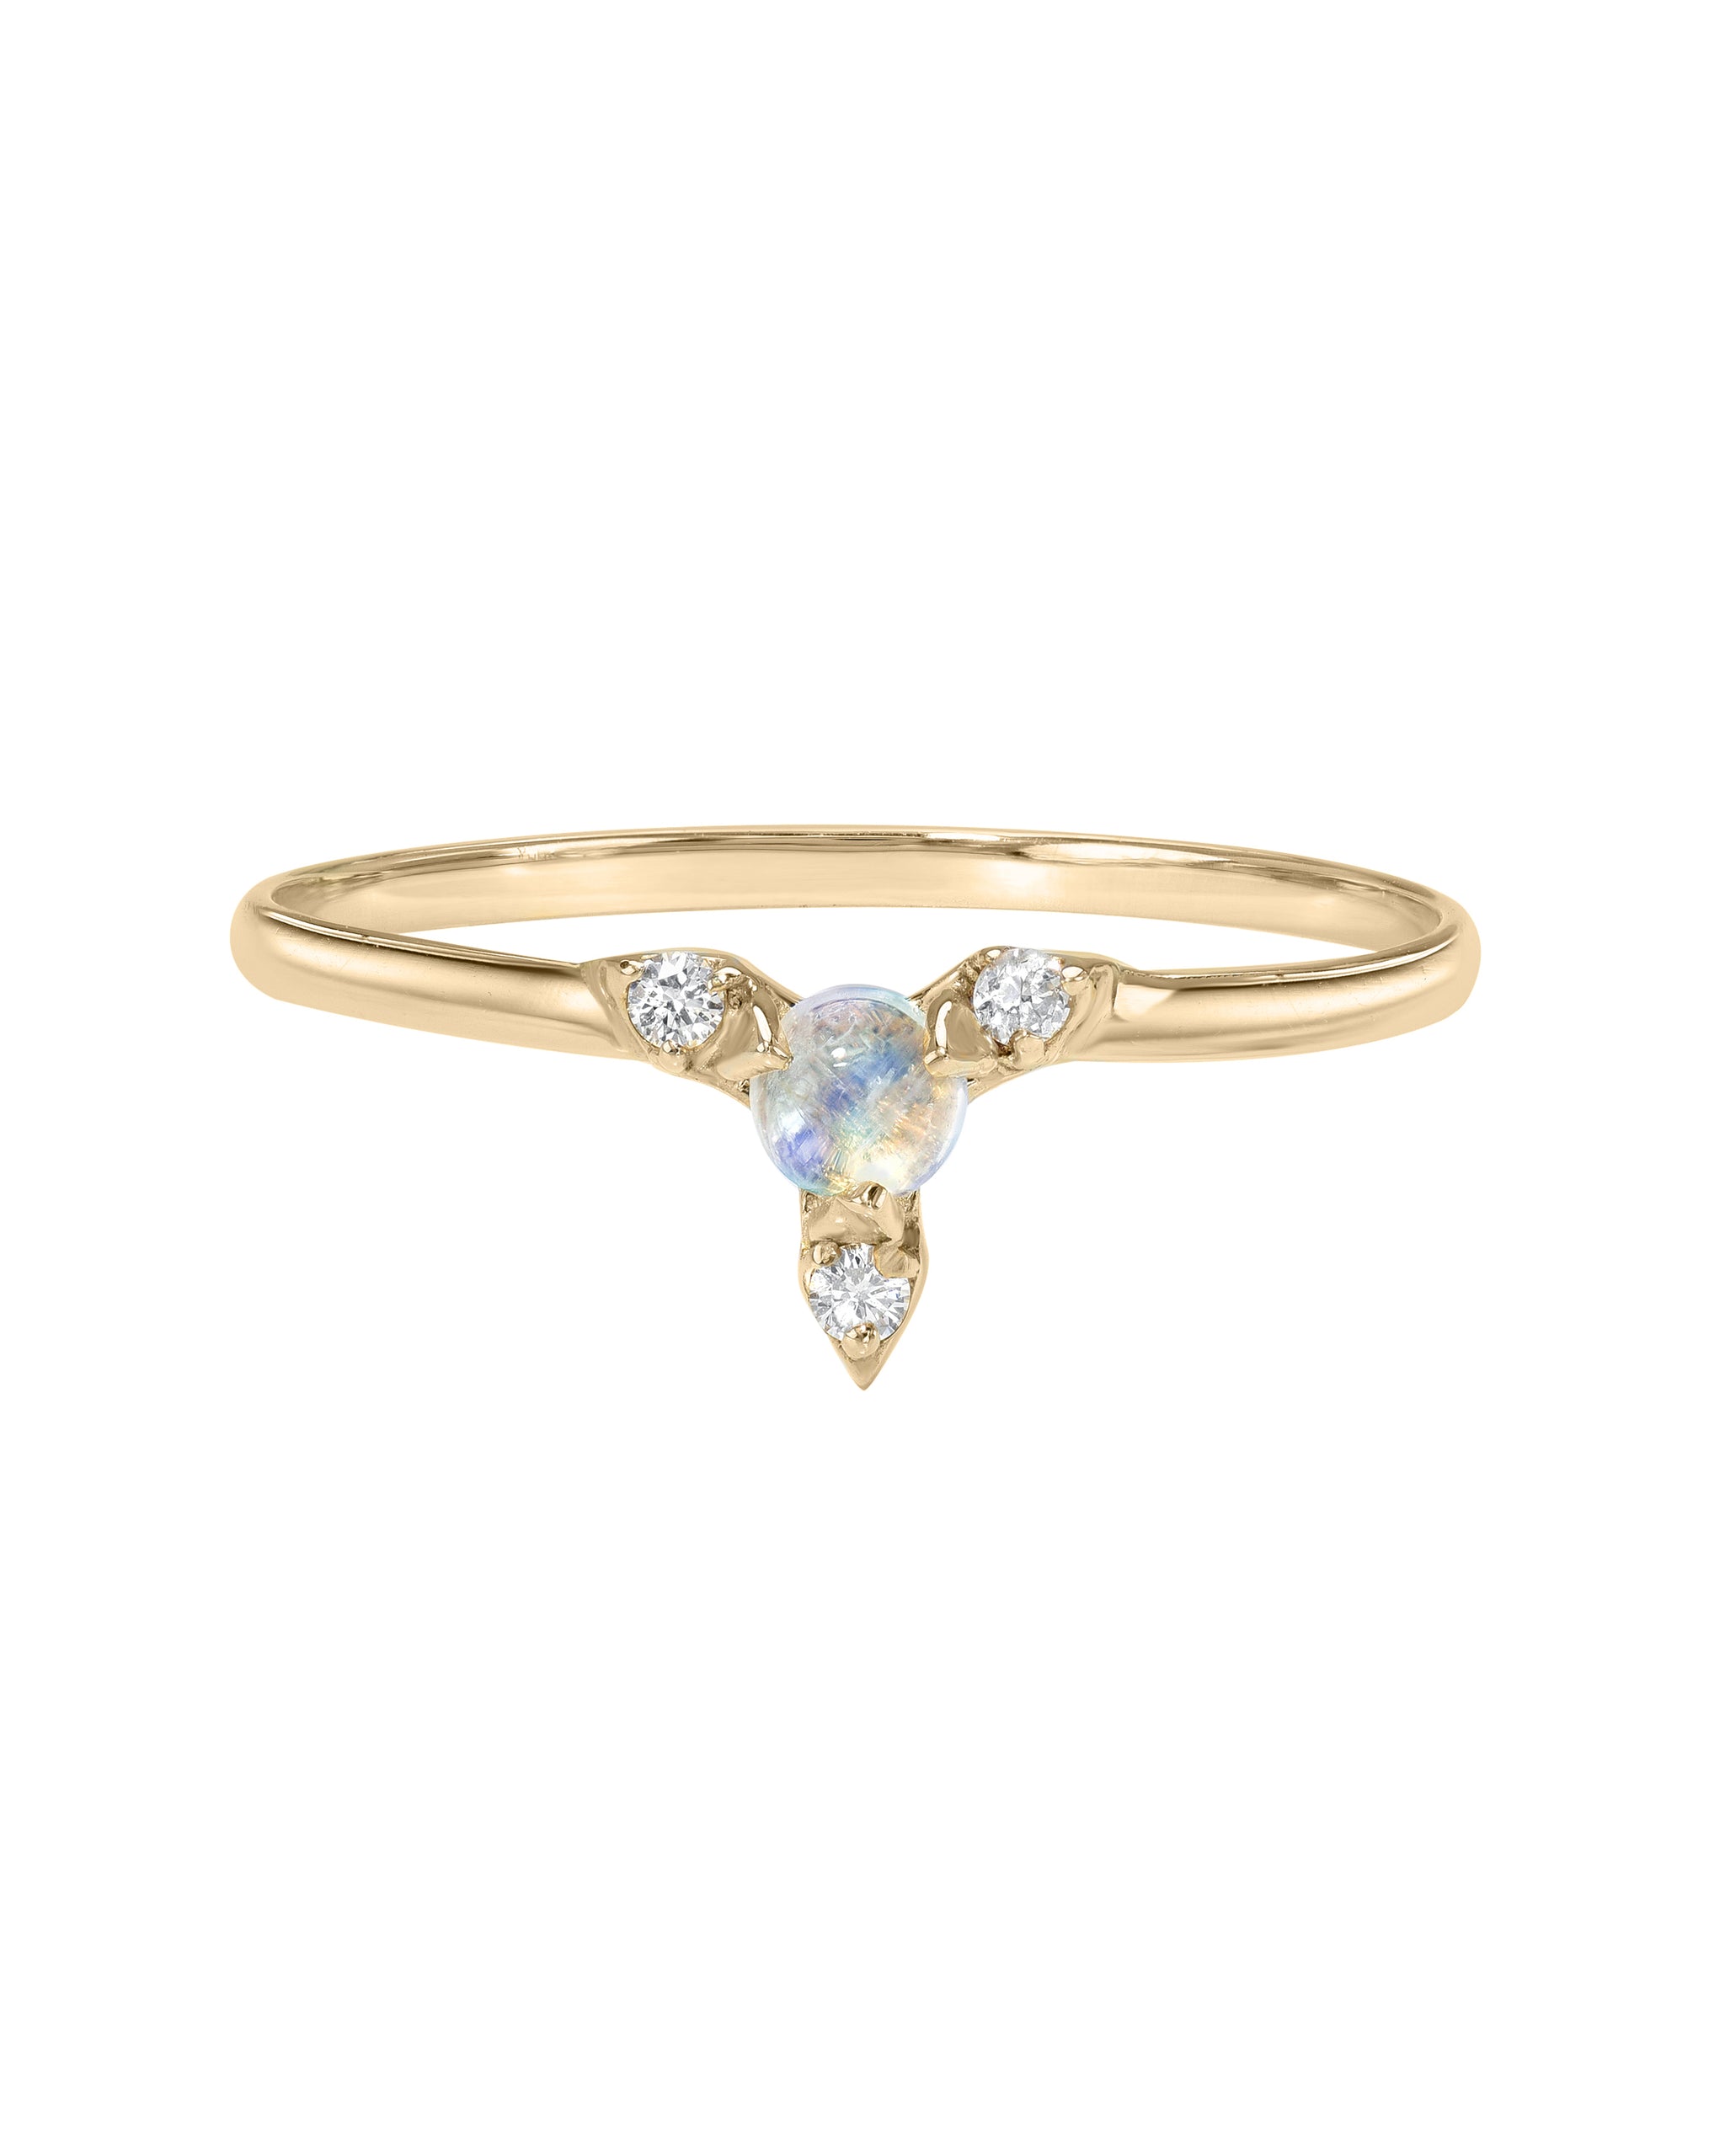 Nova Ring, Moonstone and Diamond Supernova Ring, 14k Yellow Gold, Made by Turquoise and Tobacco 